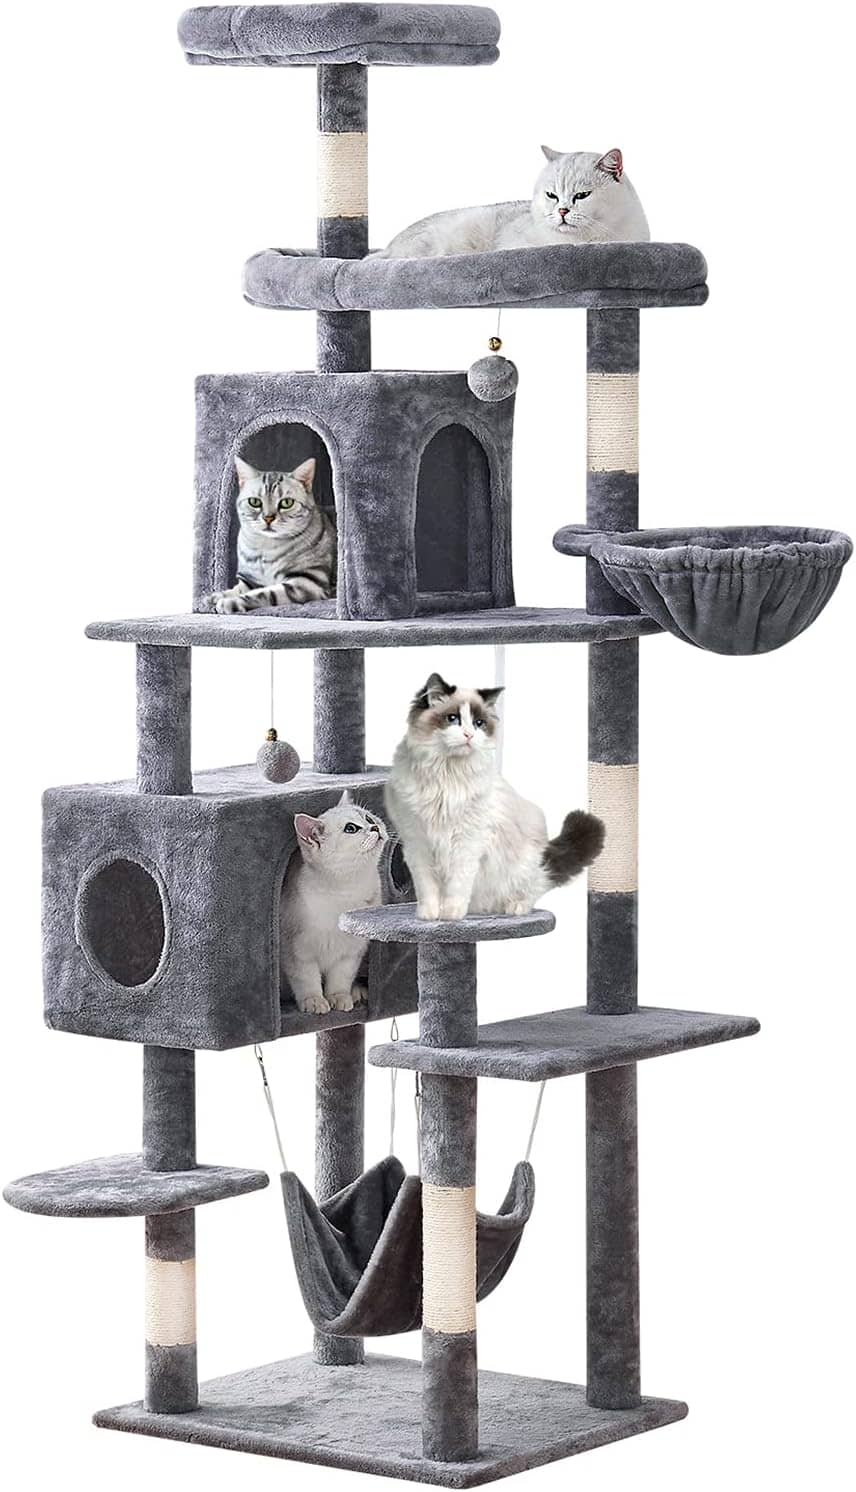 YARUOMY Cat Tree Furniture with Scratching Posts